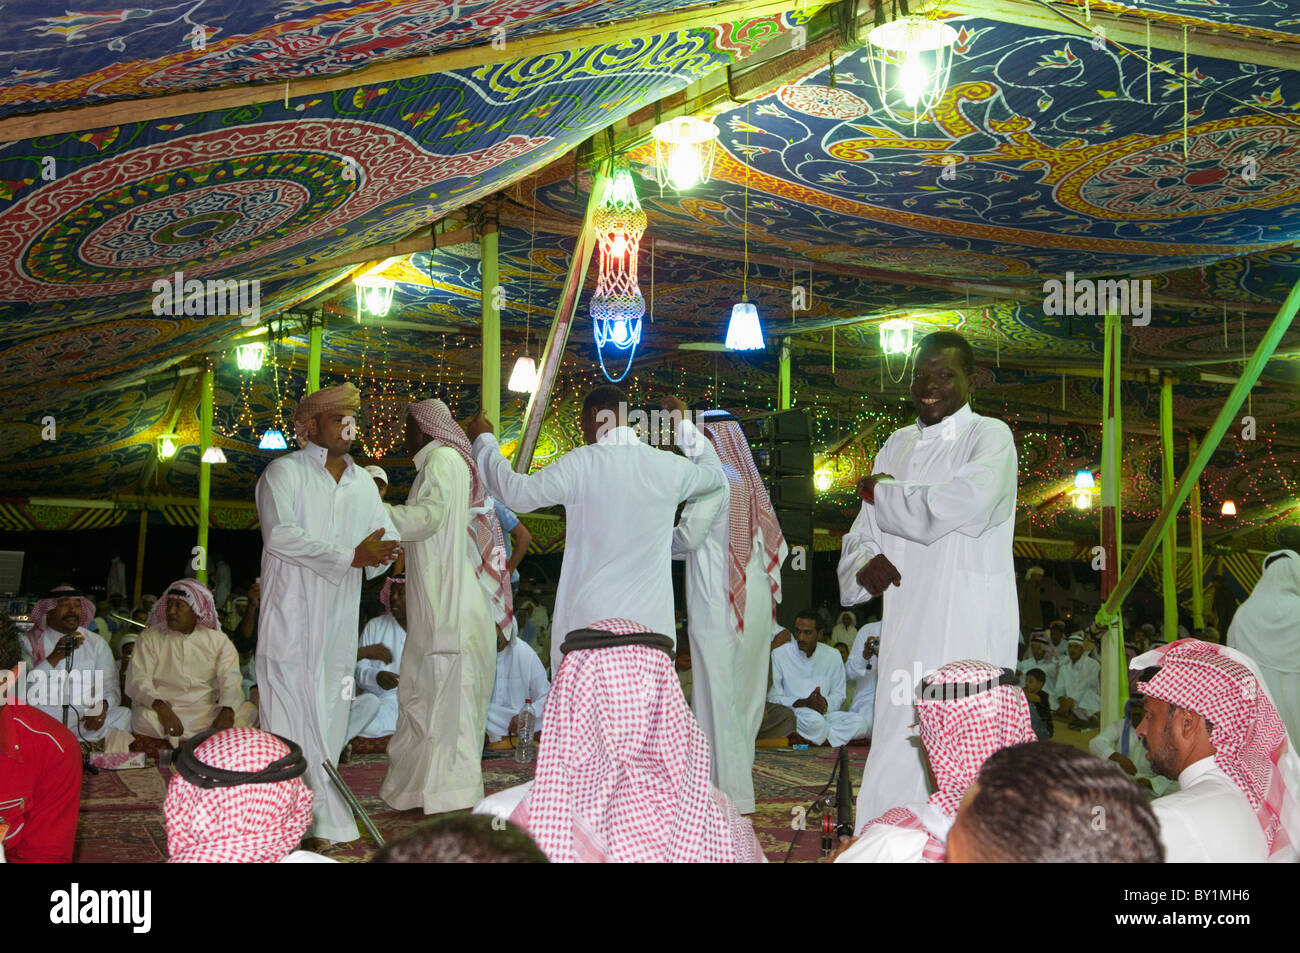 Guests celebrate with dance as other guests look on during a traditional Bedouin wedding celebration. El Tur, Sinai, Egypt Stock Photo